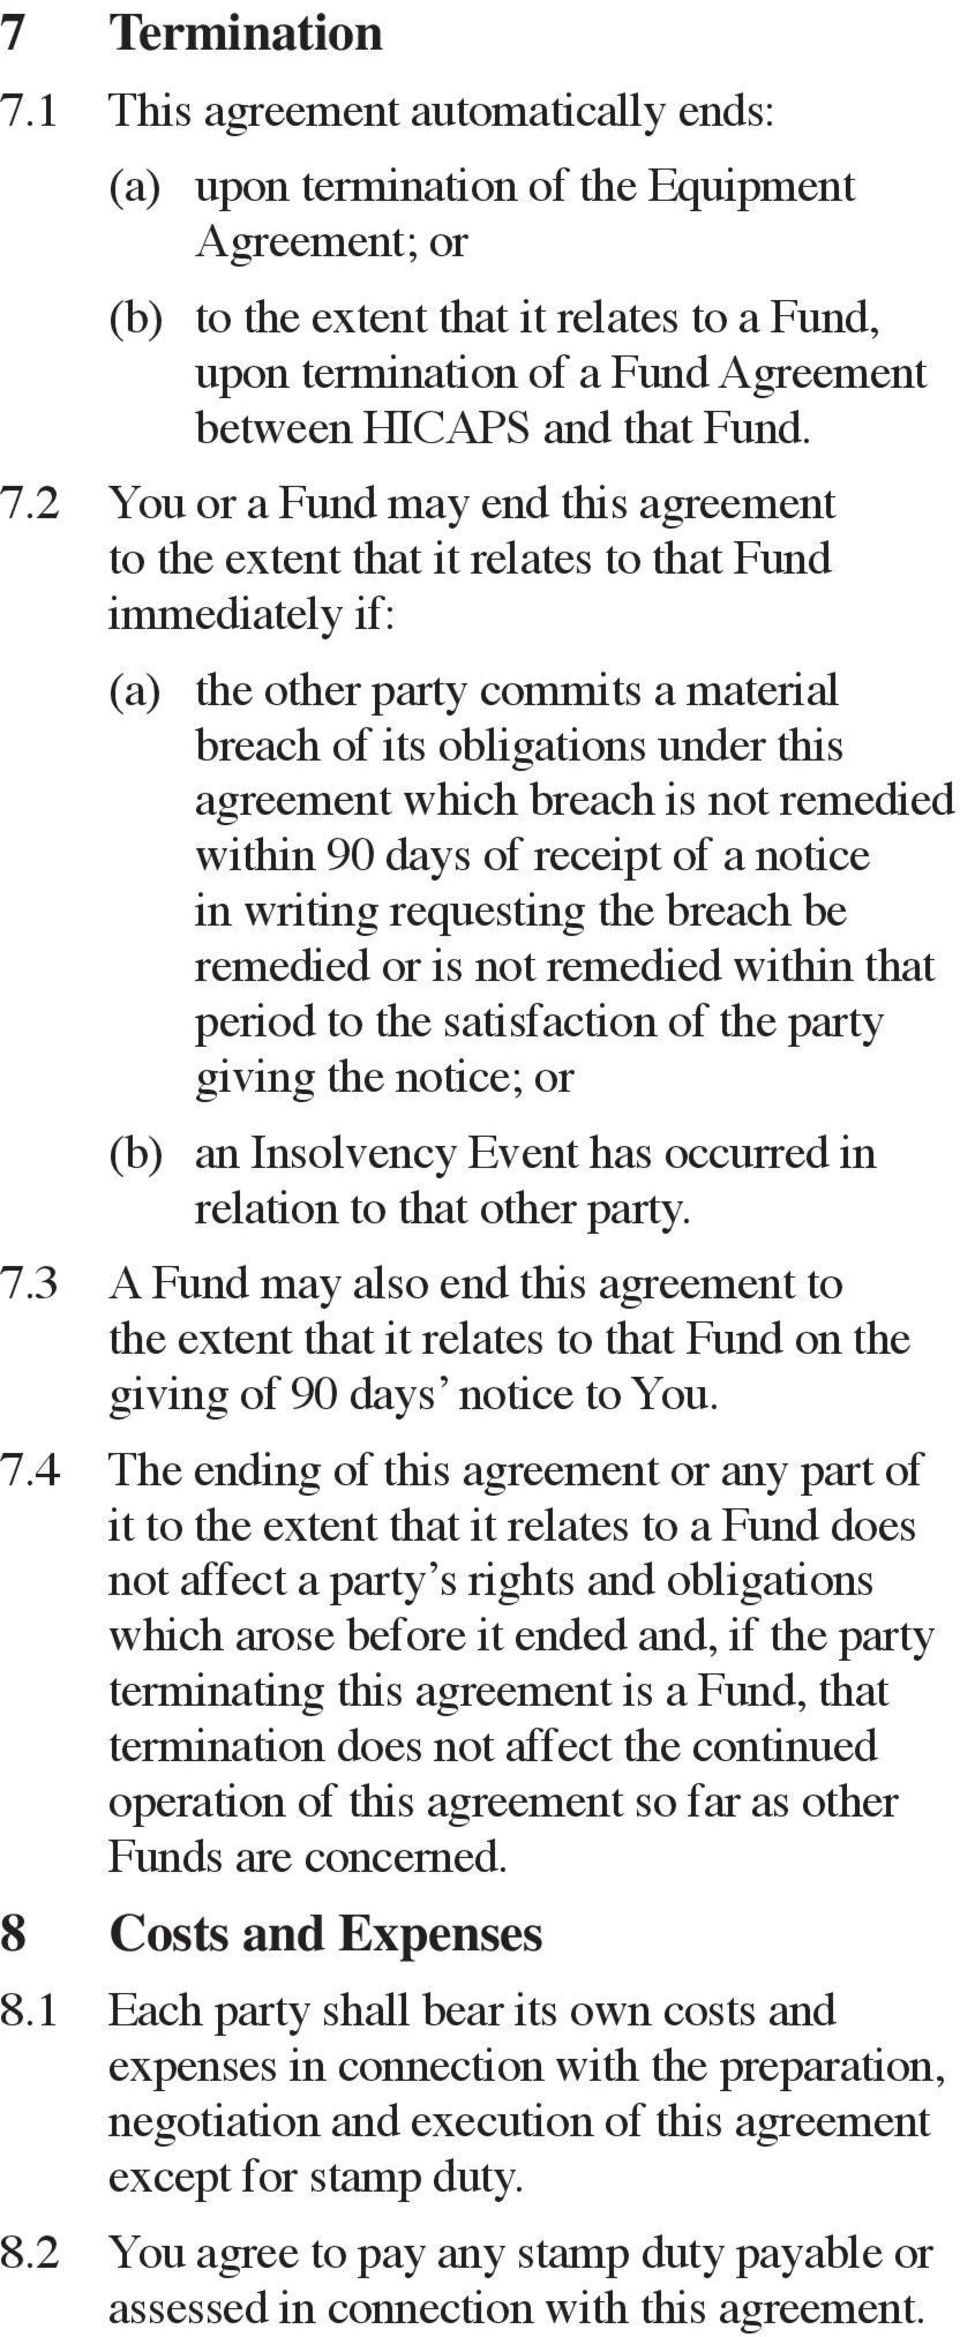 7.2 You or a Fund may end this agreement to the extent that it relates to that Fund immediately if: (a) the other party commits a material breach of its obligations under this agreement which breach